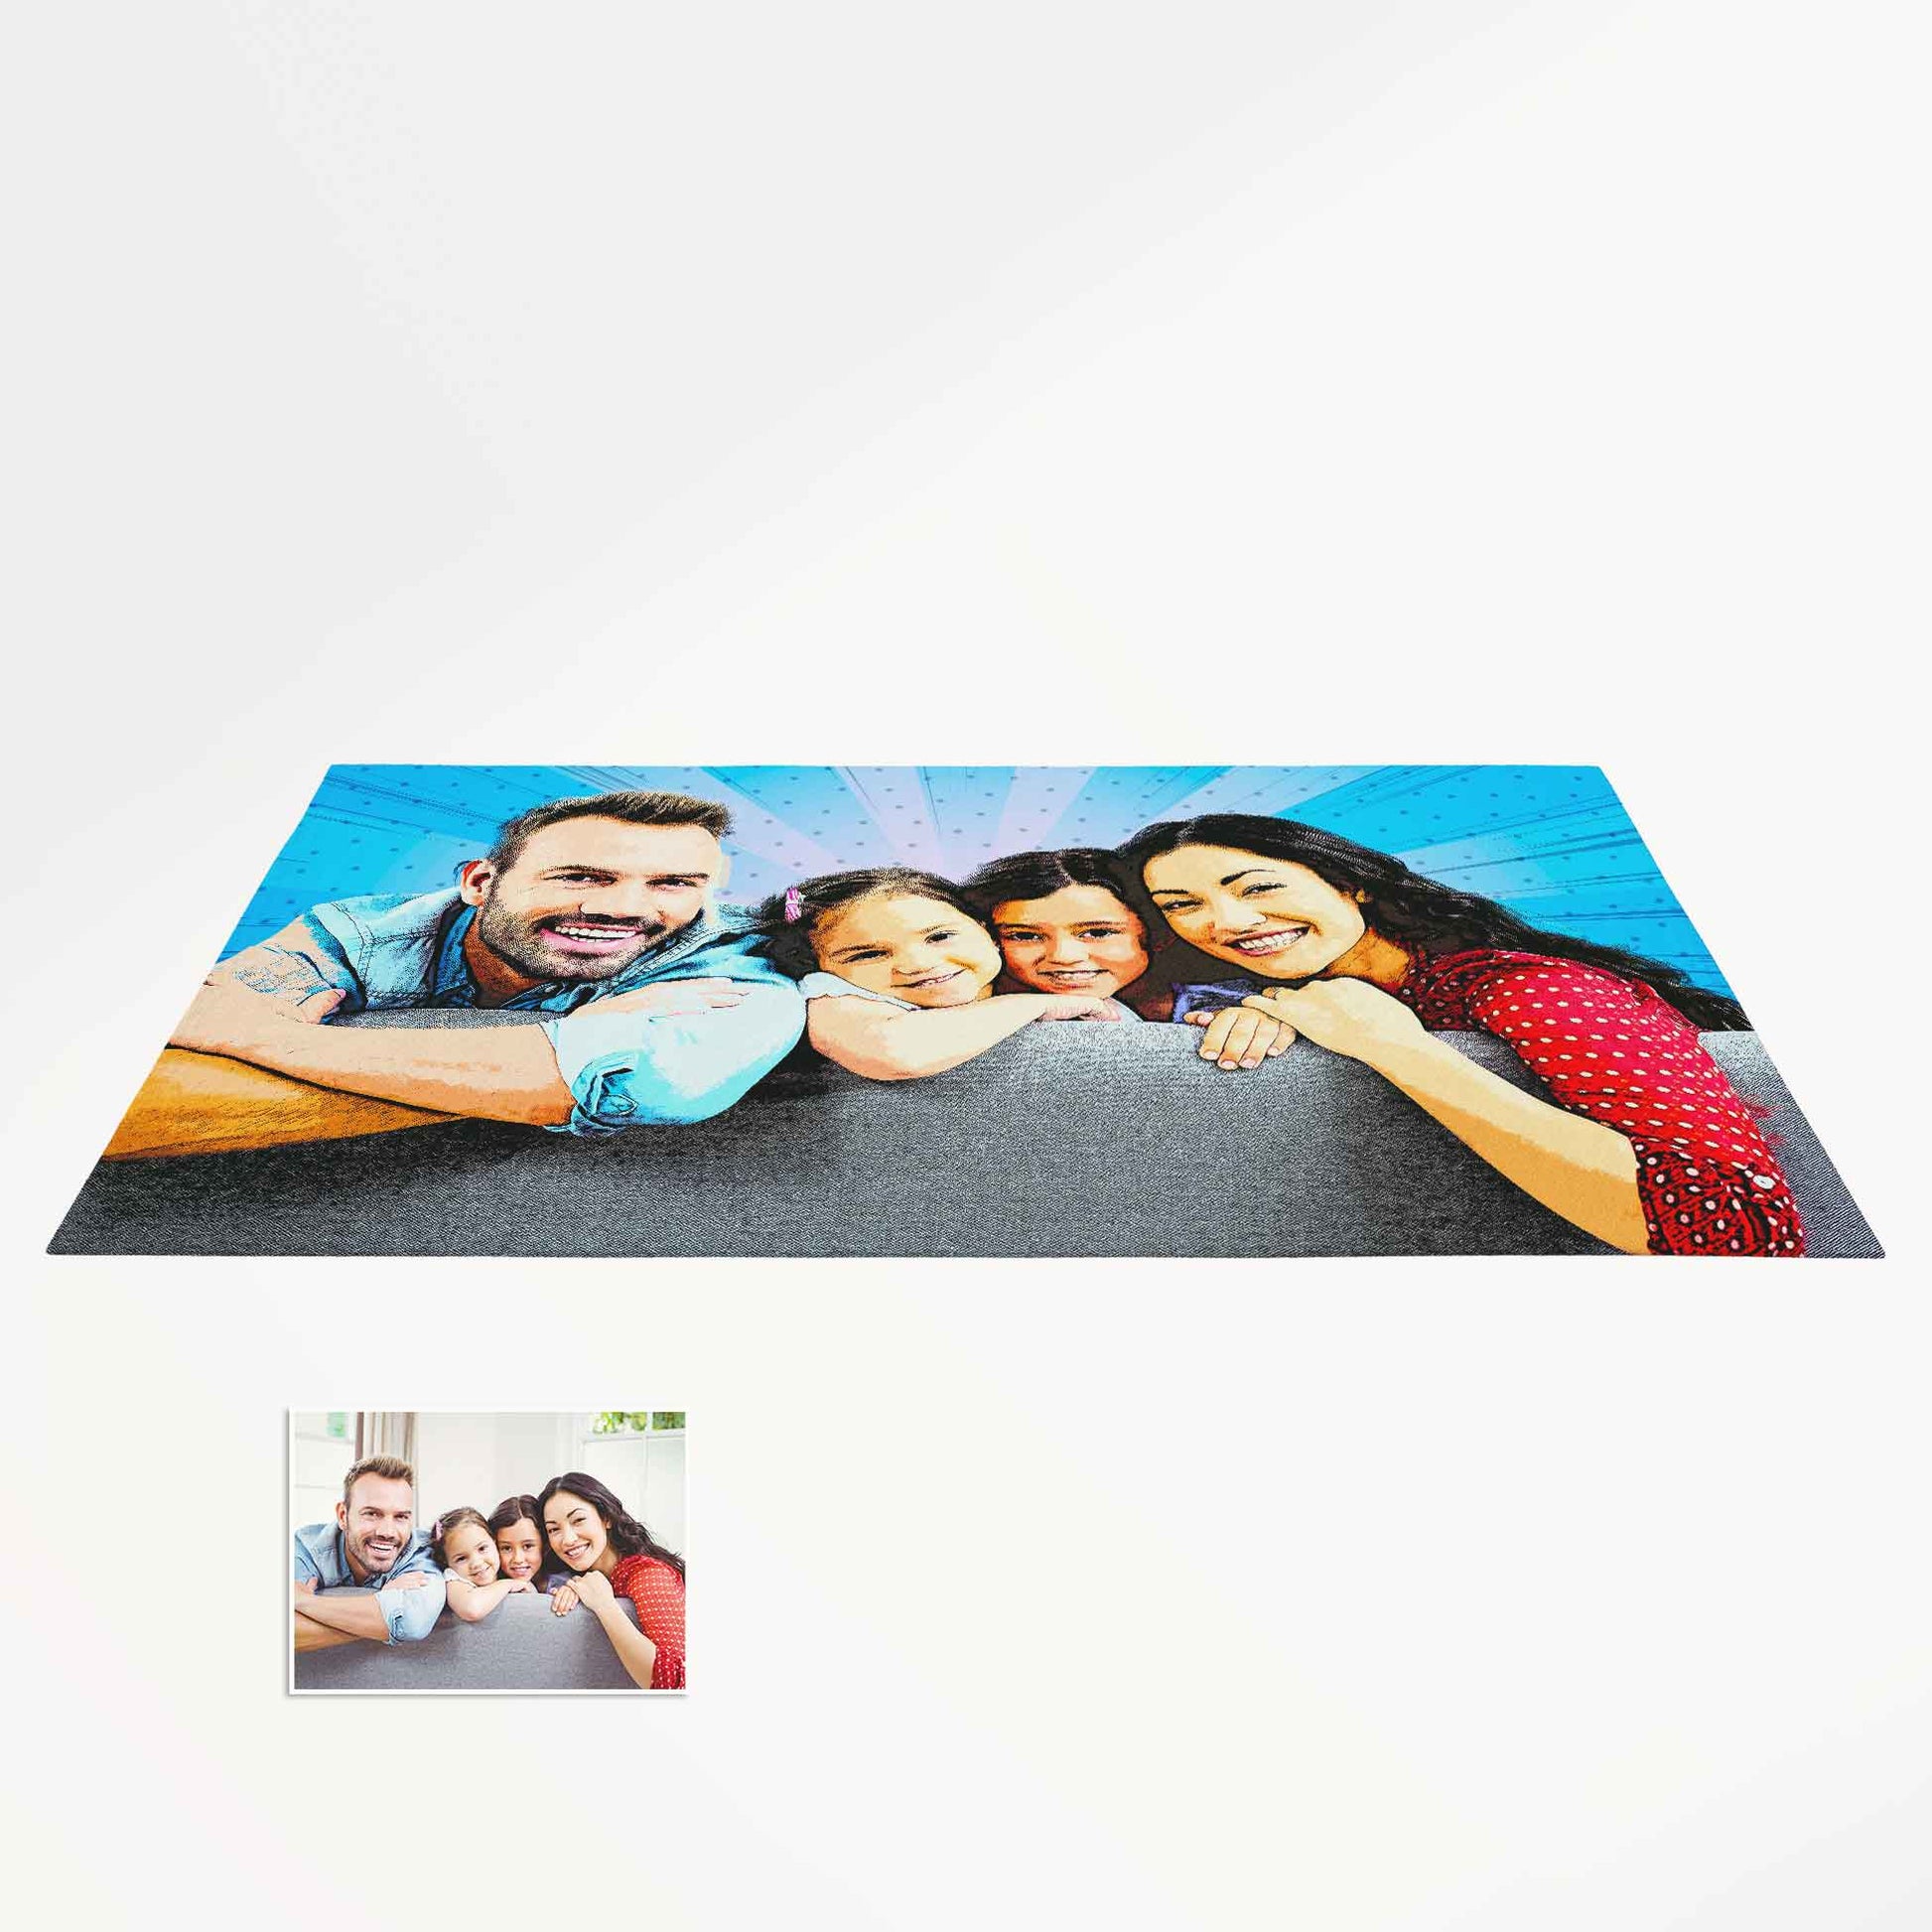 Make your space a haven of whimsy with our Personalised Cartoon Comics Photo Rug! Step into nostalgia every day. Buy yours